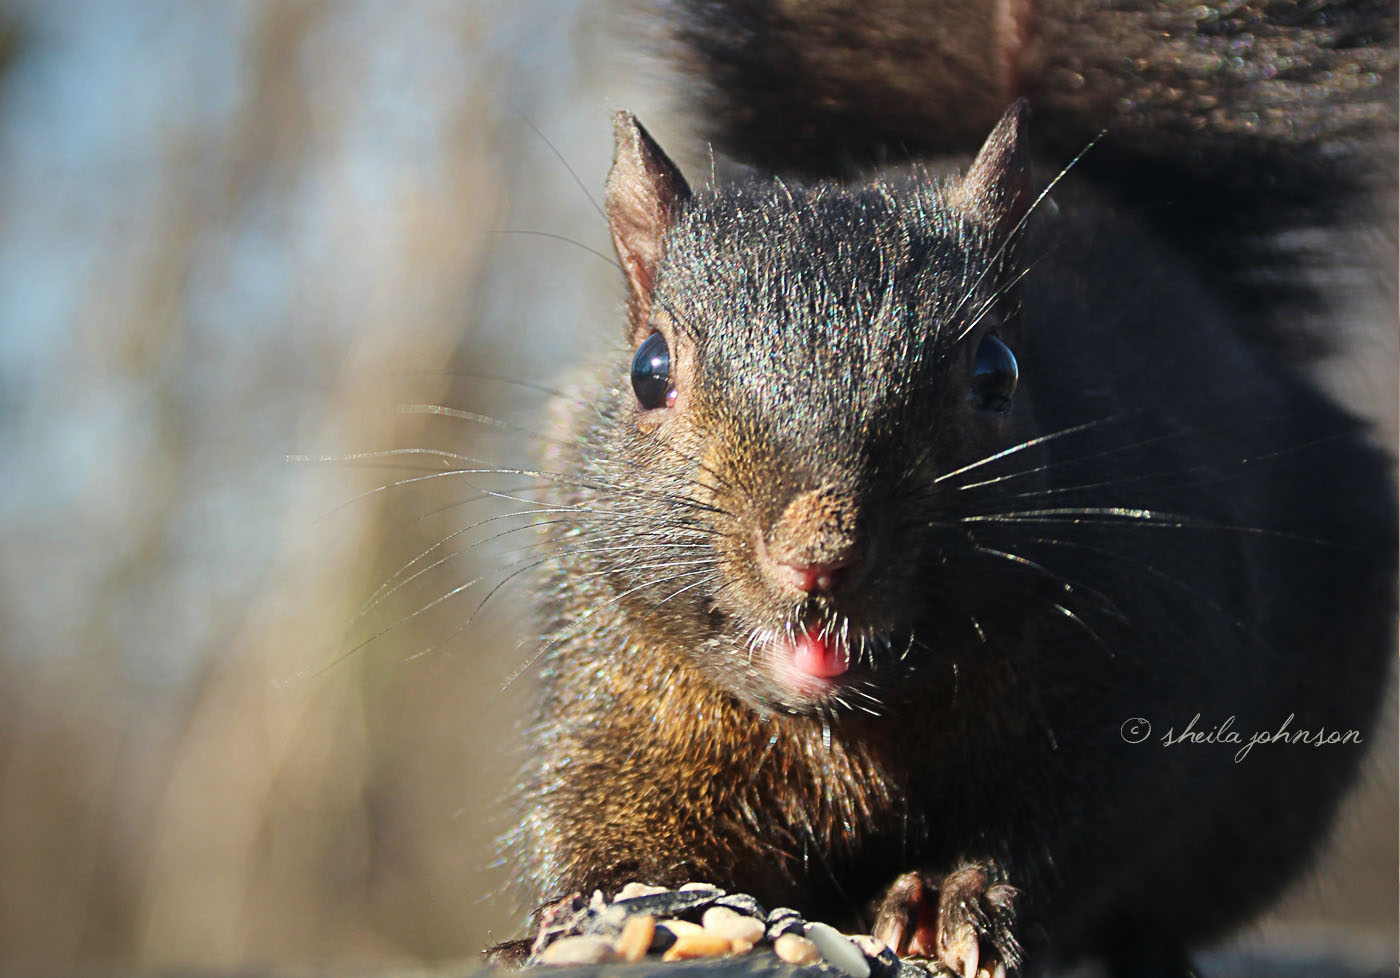 Finding A Pile Of Nuts And Seeds Left By Someone Visiting The Park, This Black Squirrel Gets A Little Sassy And Sticks His Tongue Out At The Camera.